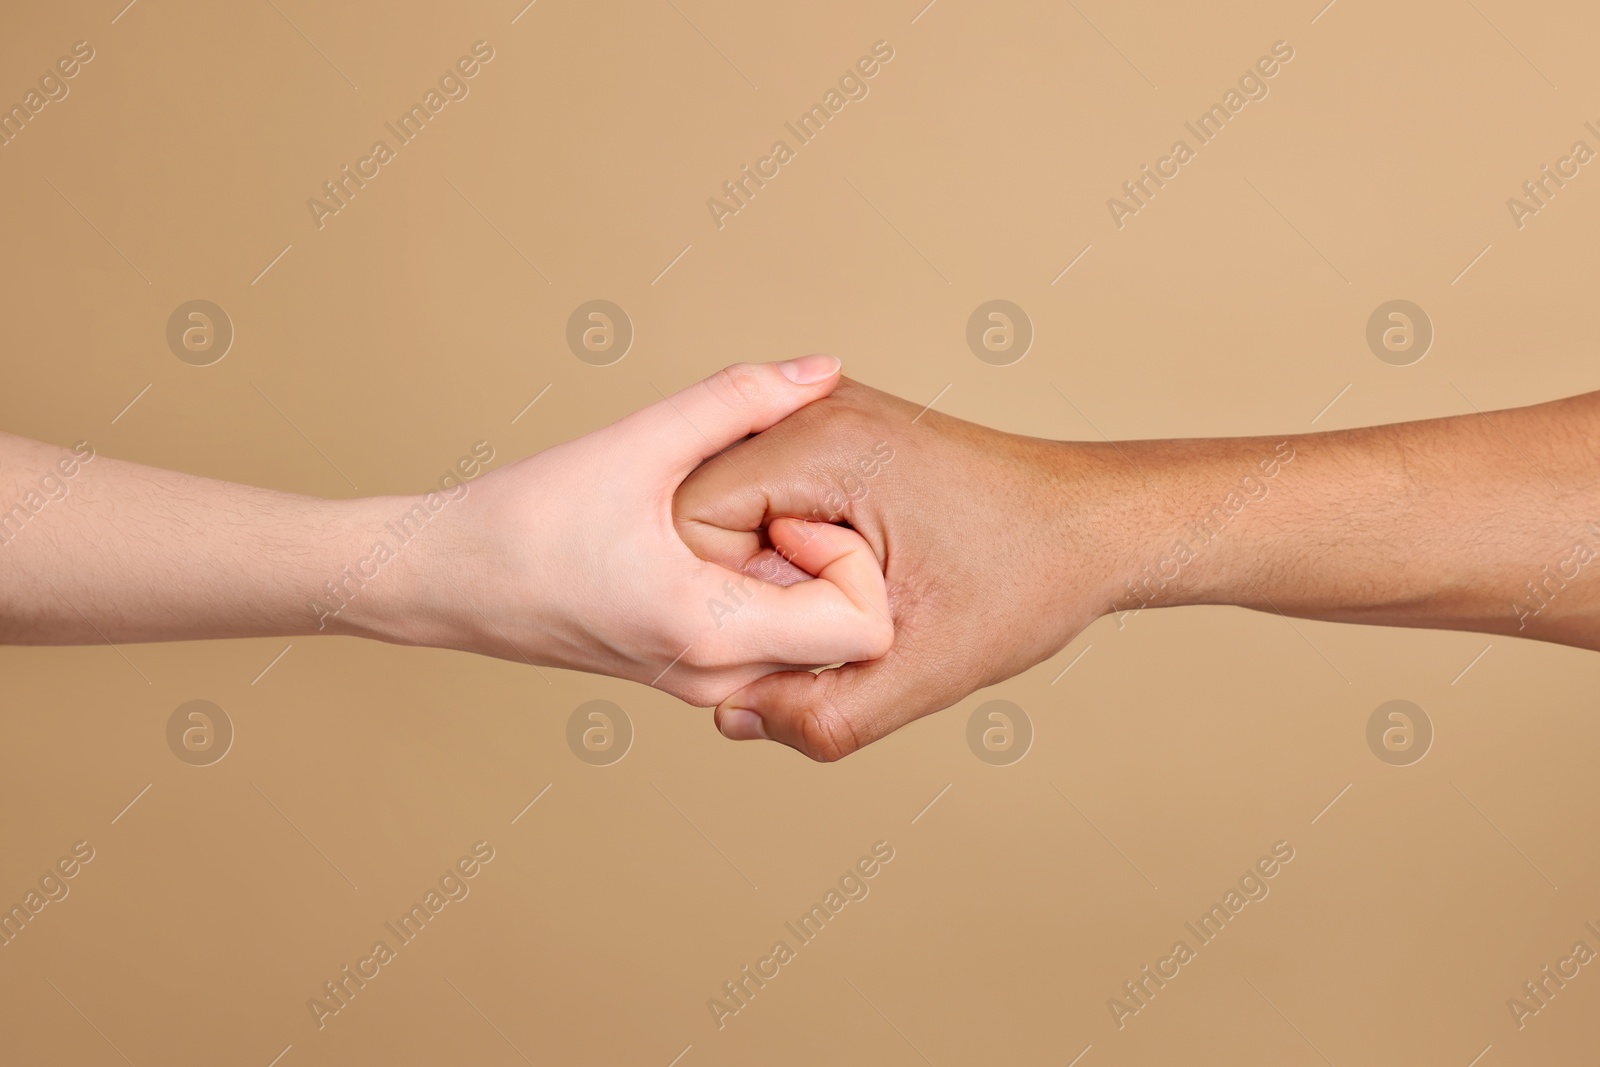 Photo of International relationships. People strongly joining hands on light brown background, closeup